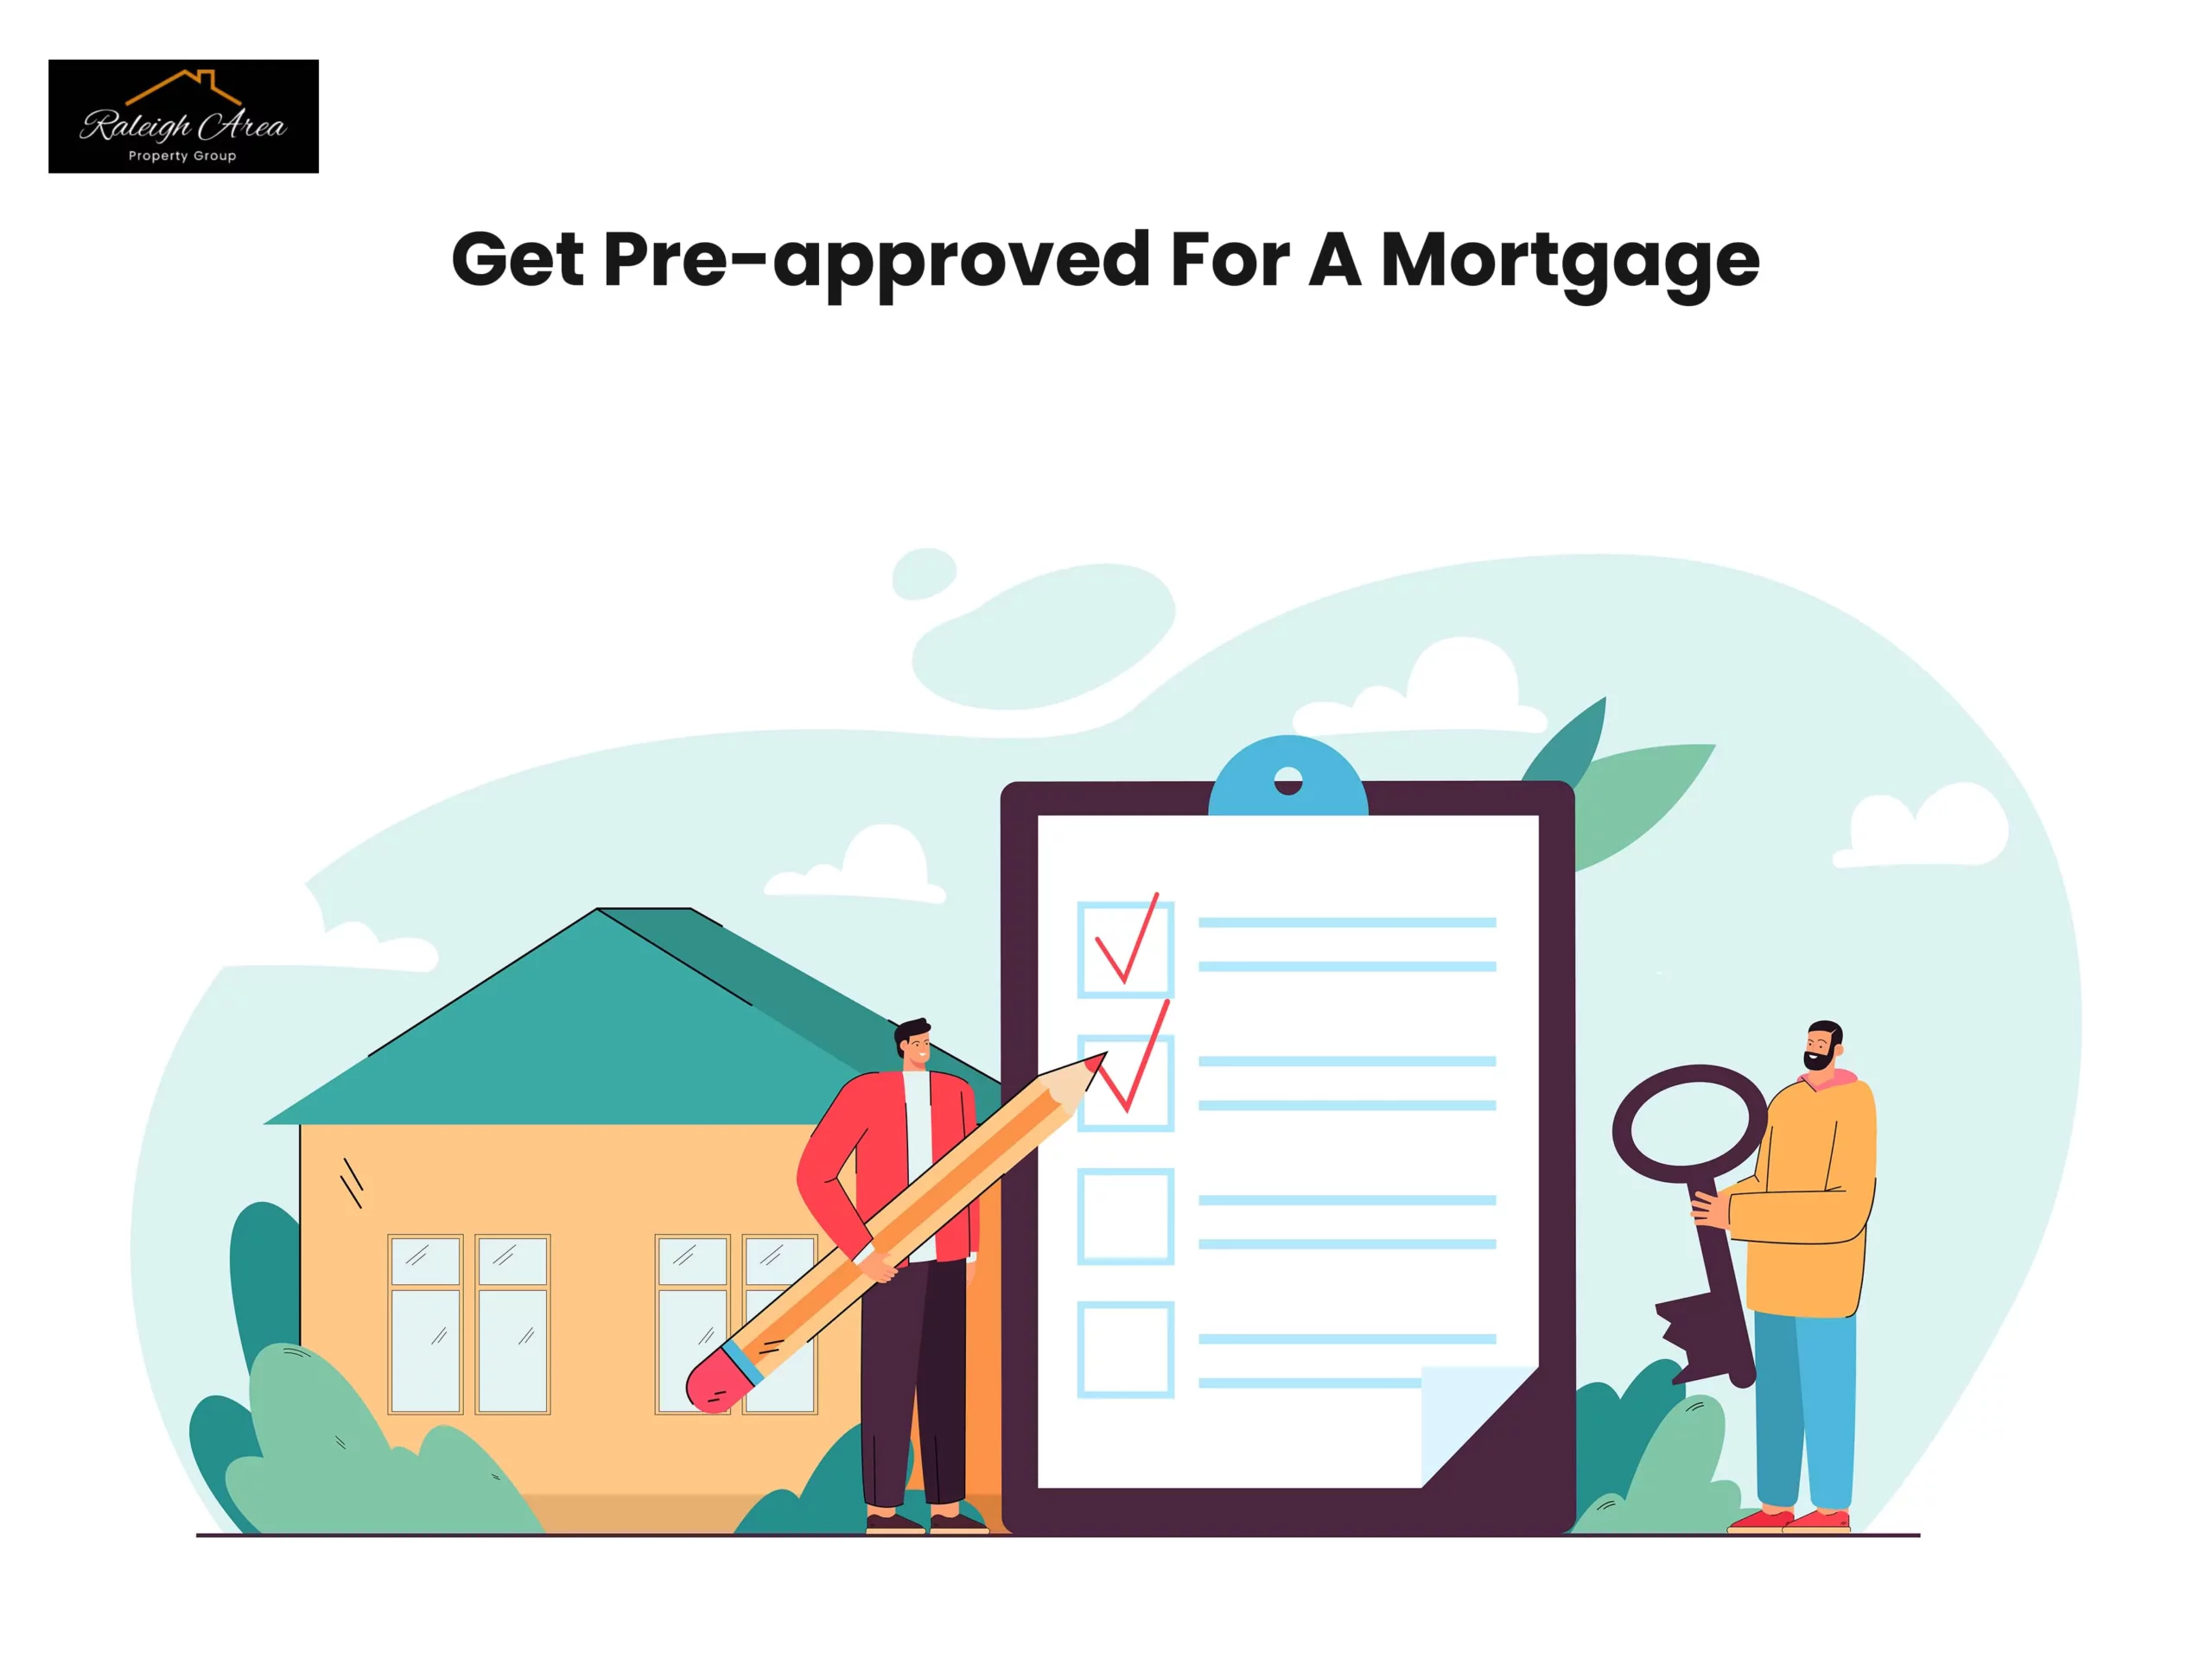 Get Pre-approved For A Mortgage